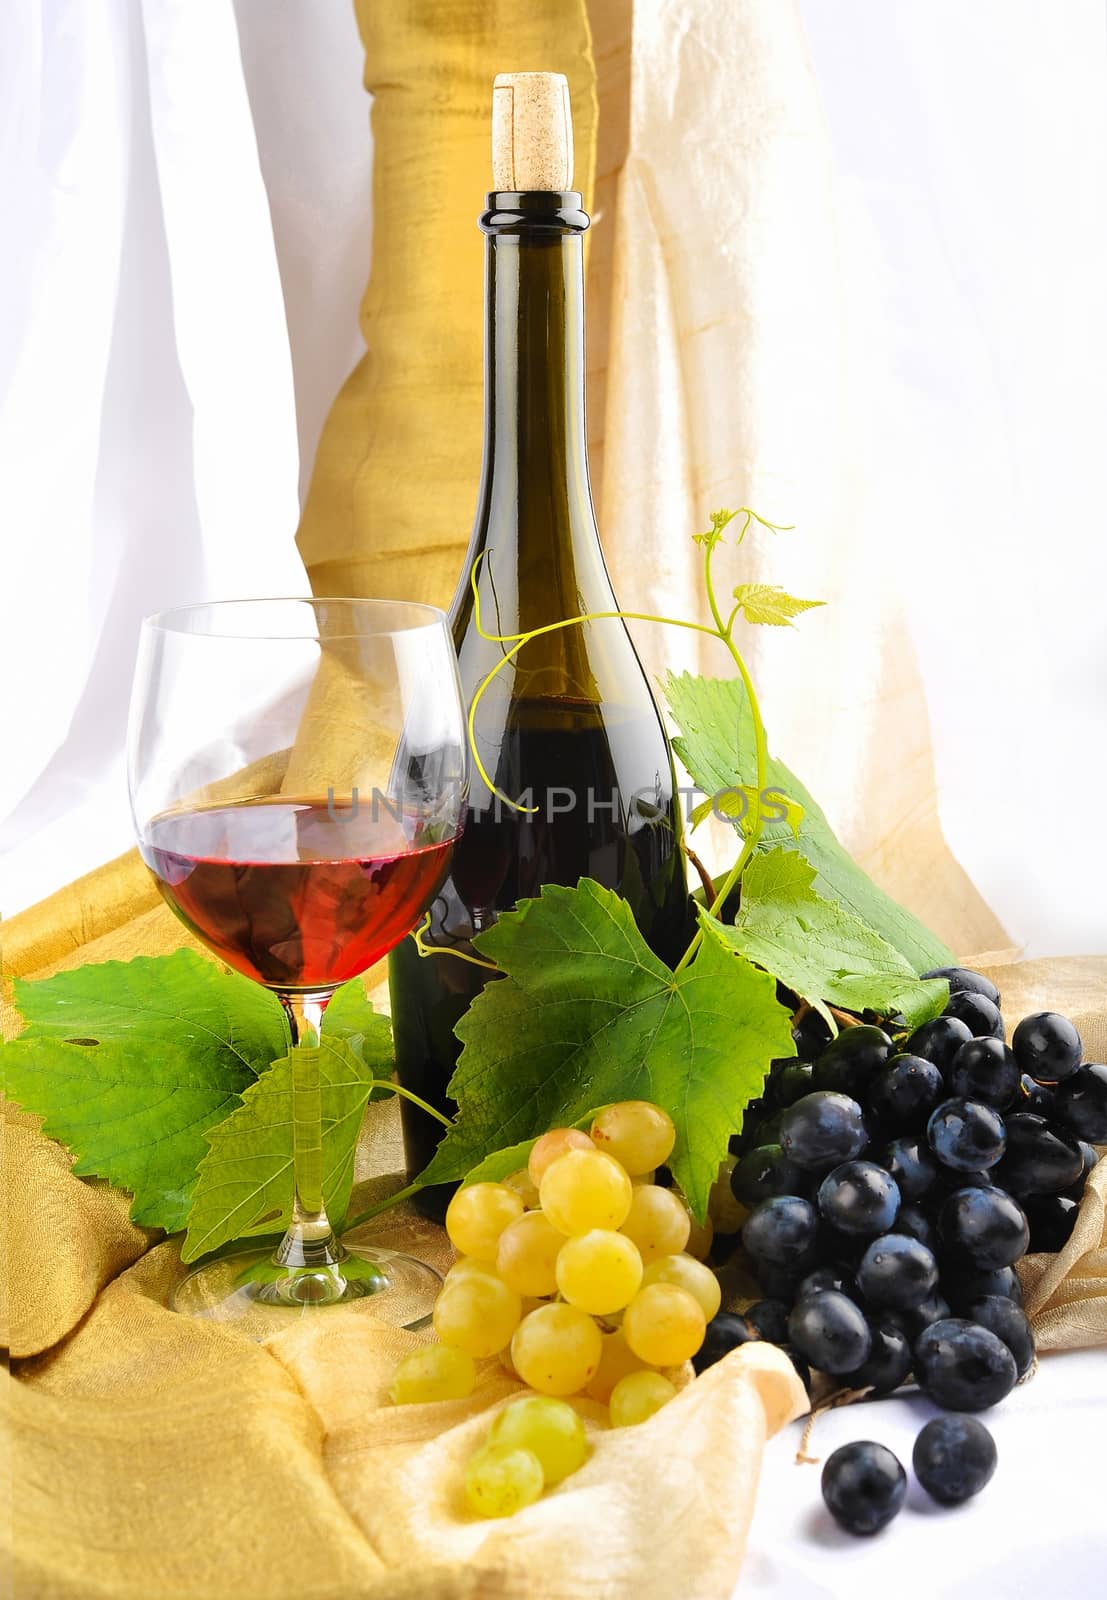 Wine and Grapes Setup with wine bottles and grapes